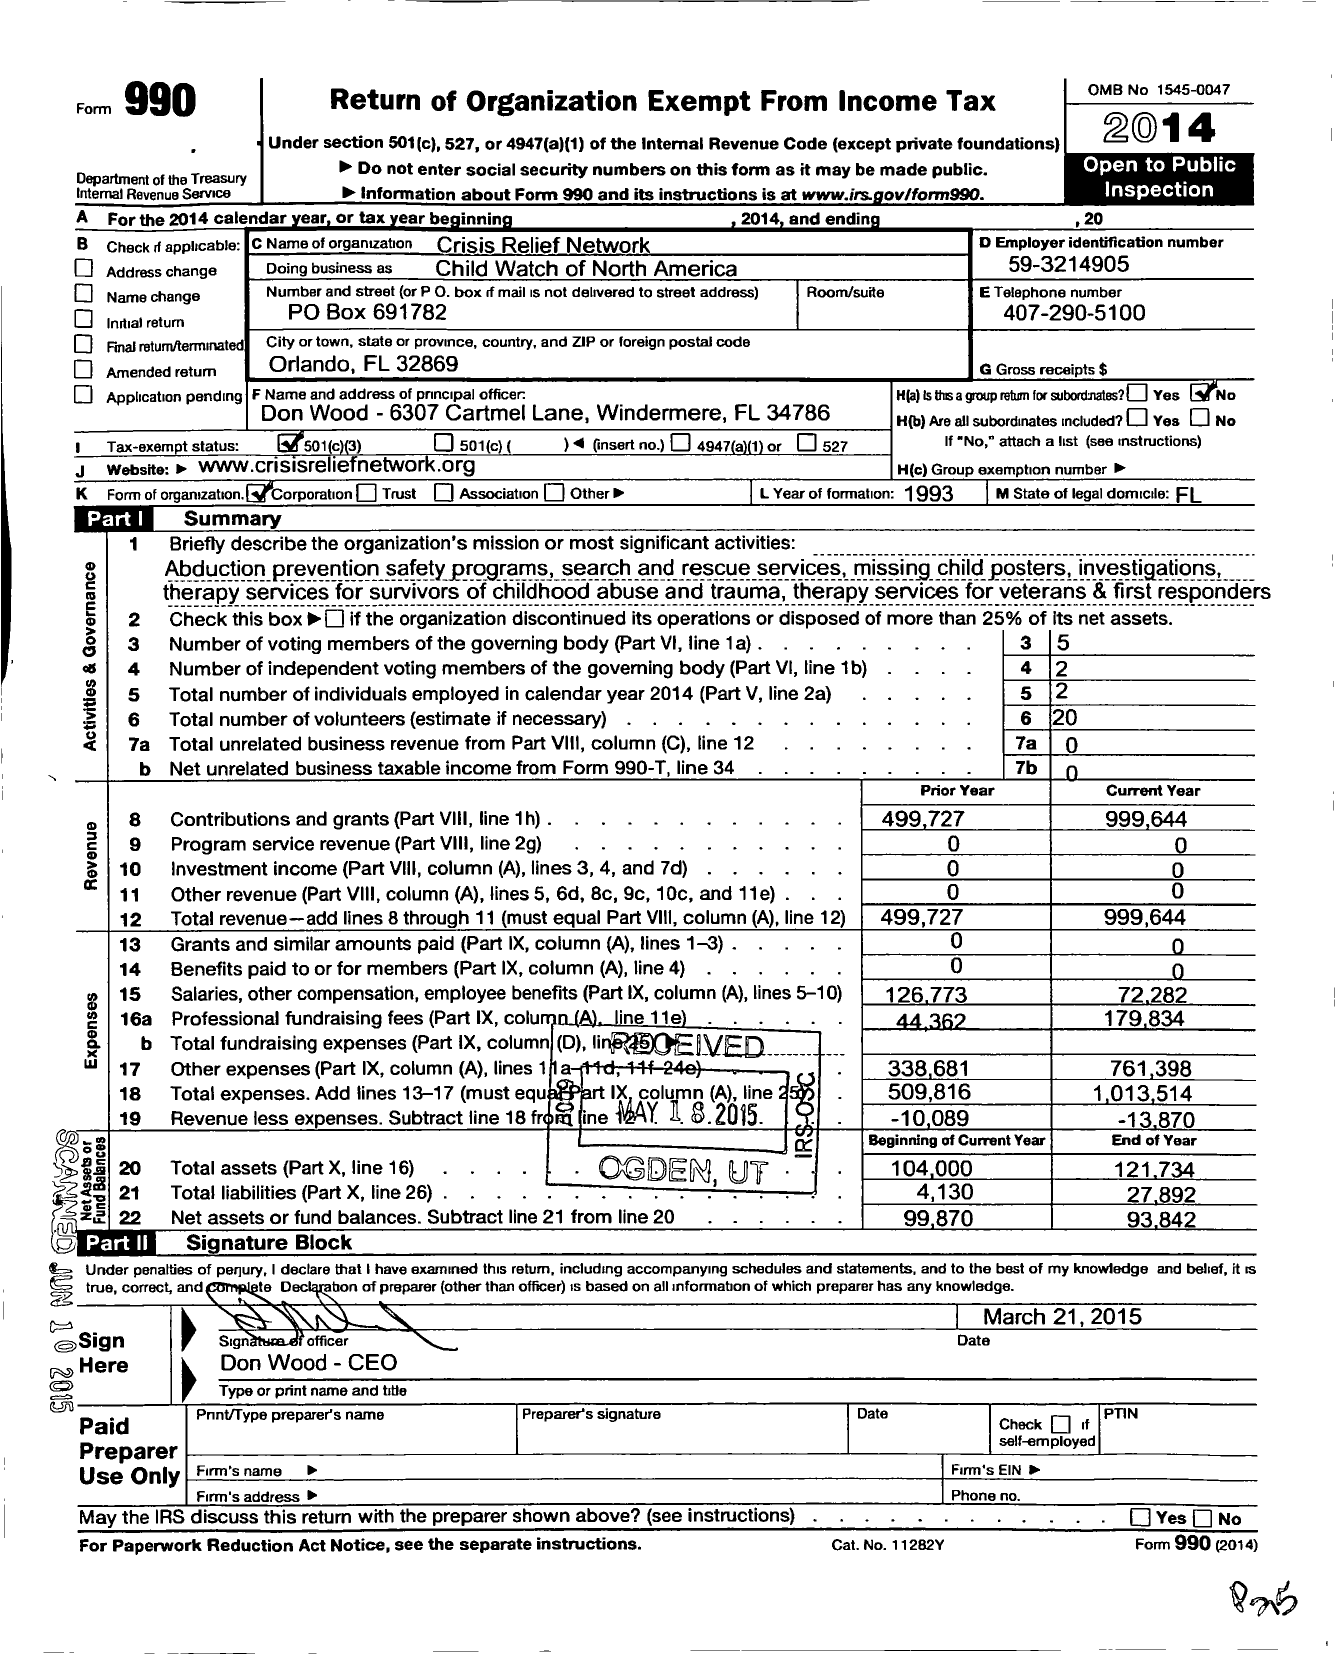 Image of first page of 2014 Form 990 for Child Watch of North America